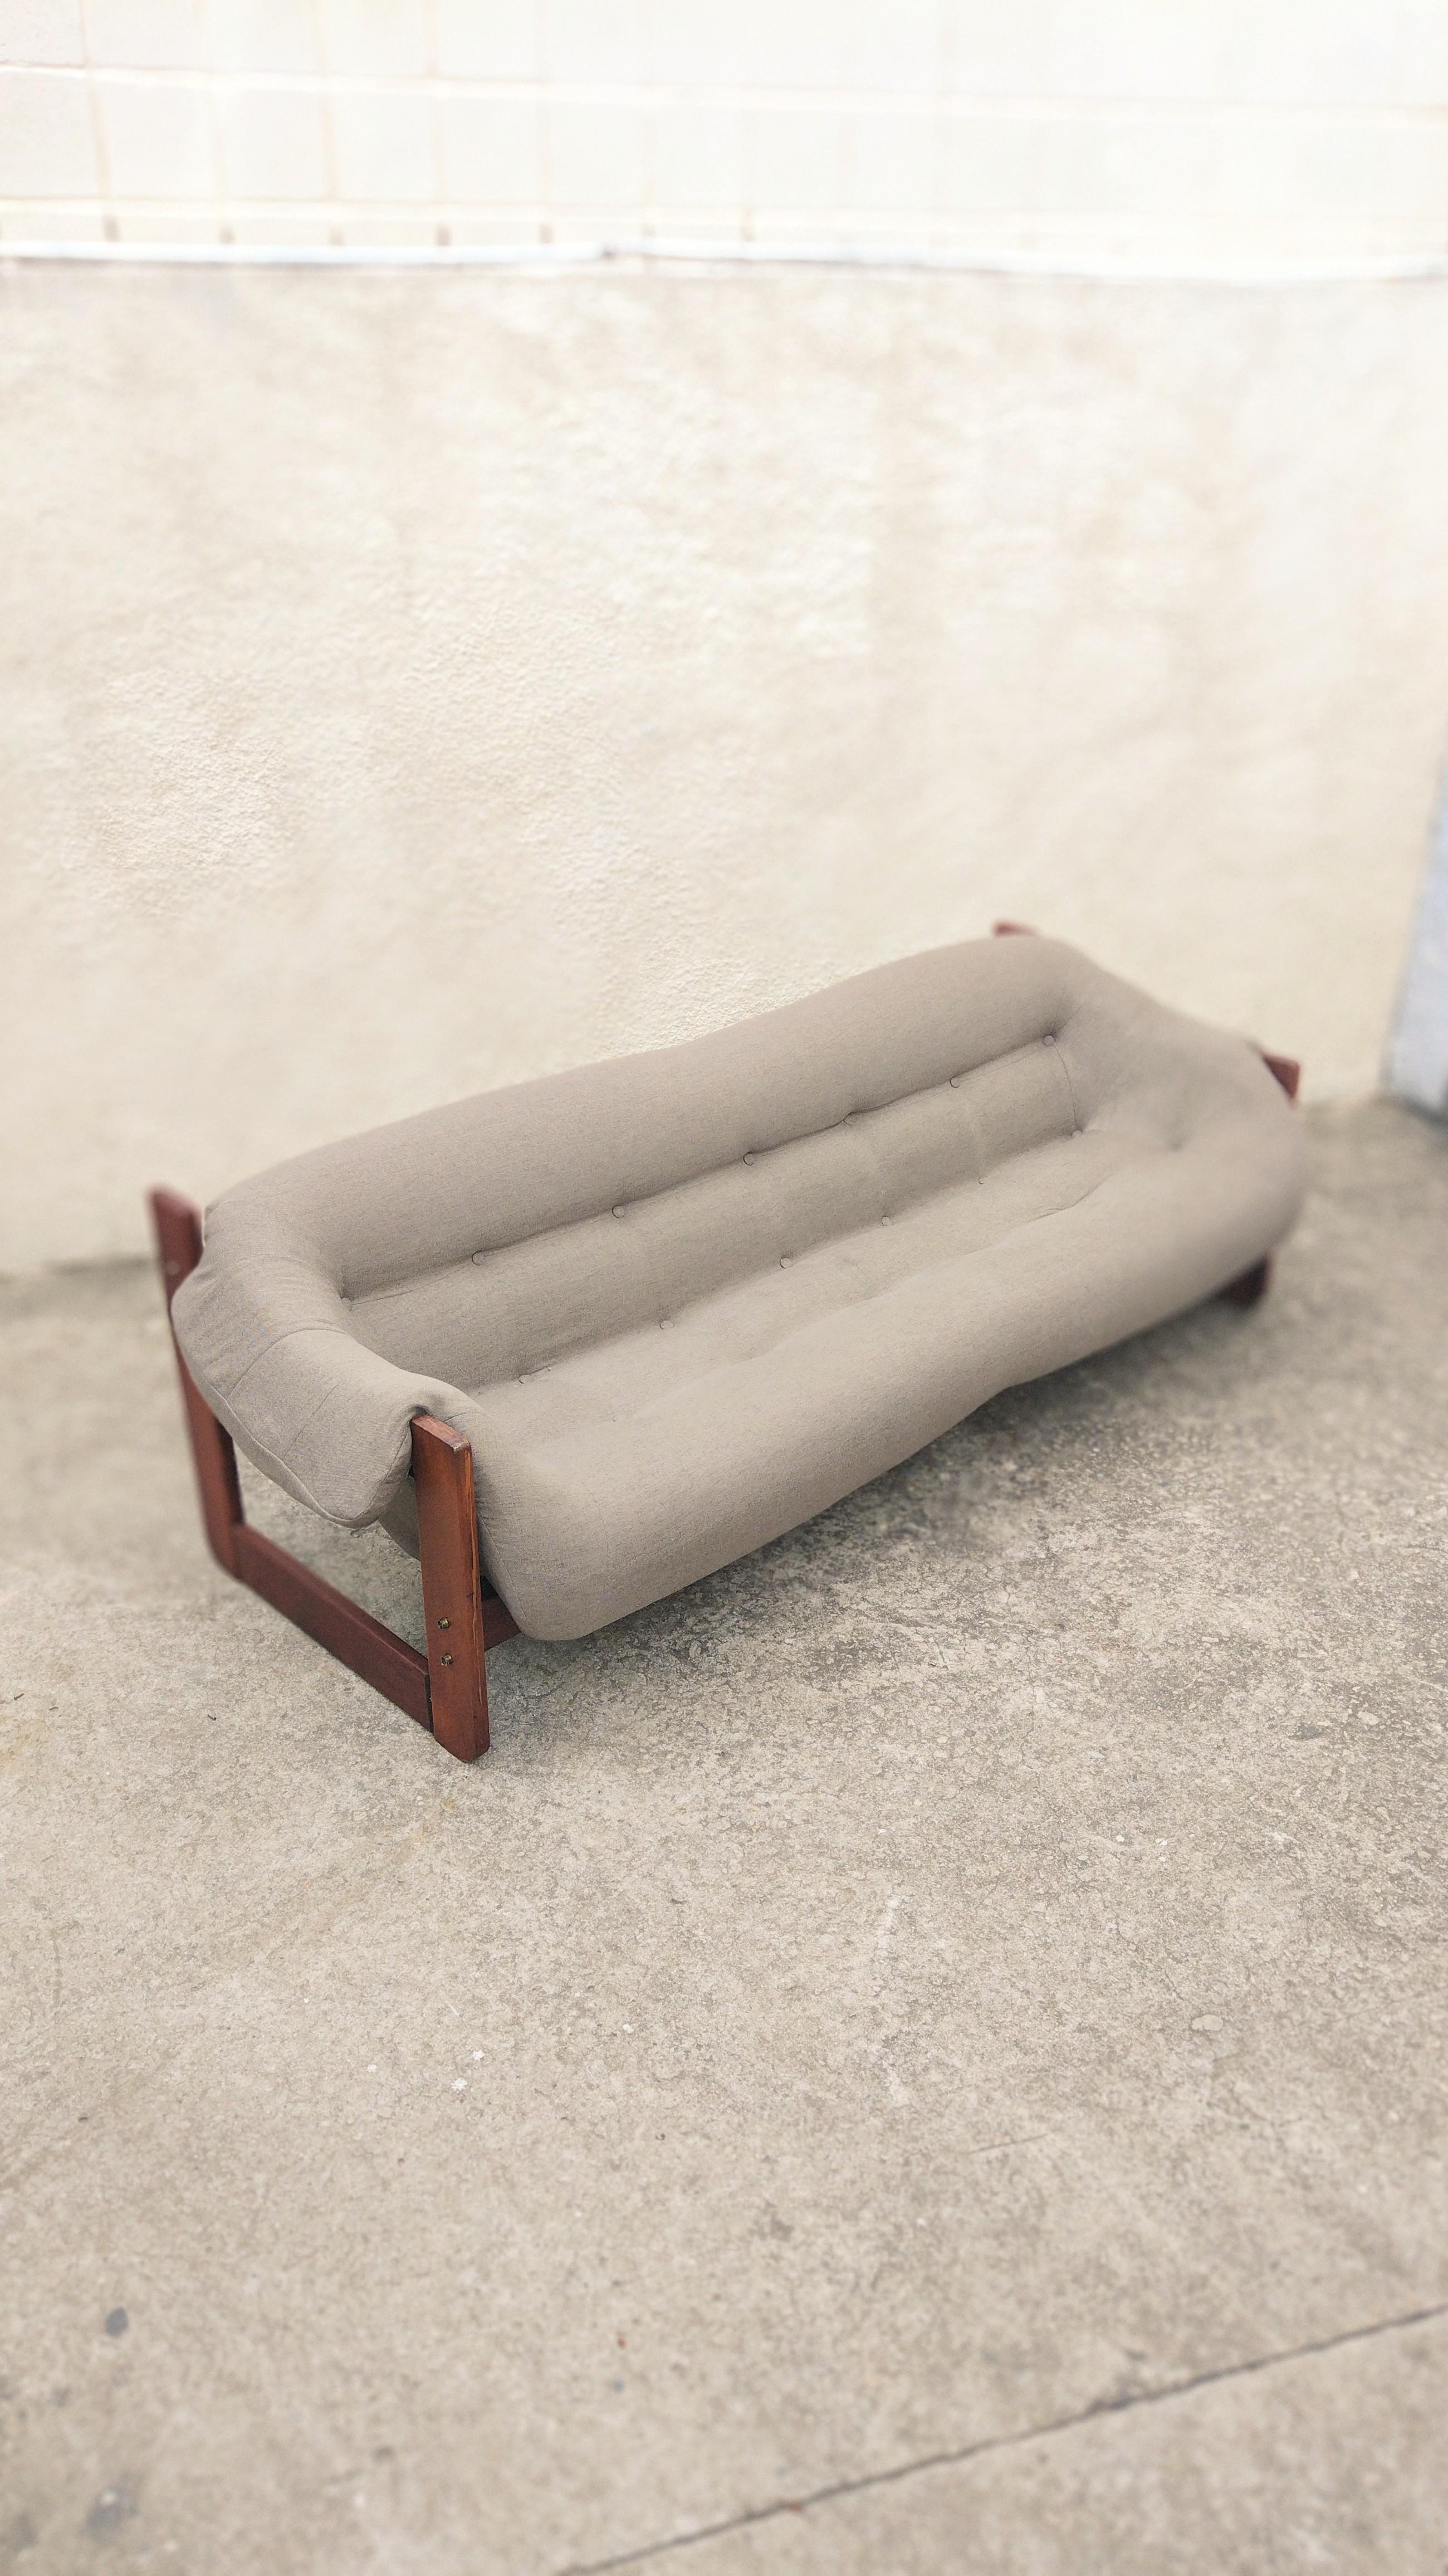 Sofa MP-97 attributed to Percival Lafer in solid Jatobá, firm and resistant structure, comfortable upholstery. In good conditions

Approximate measure
width: 210cm / height: 64cm / depth: 85cm

Seat height: 35cm

Main wear details:
-Wooden